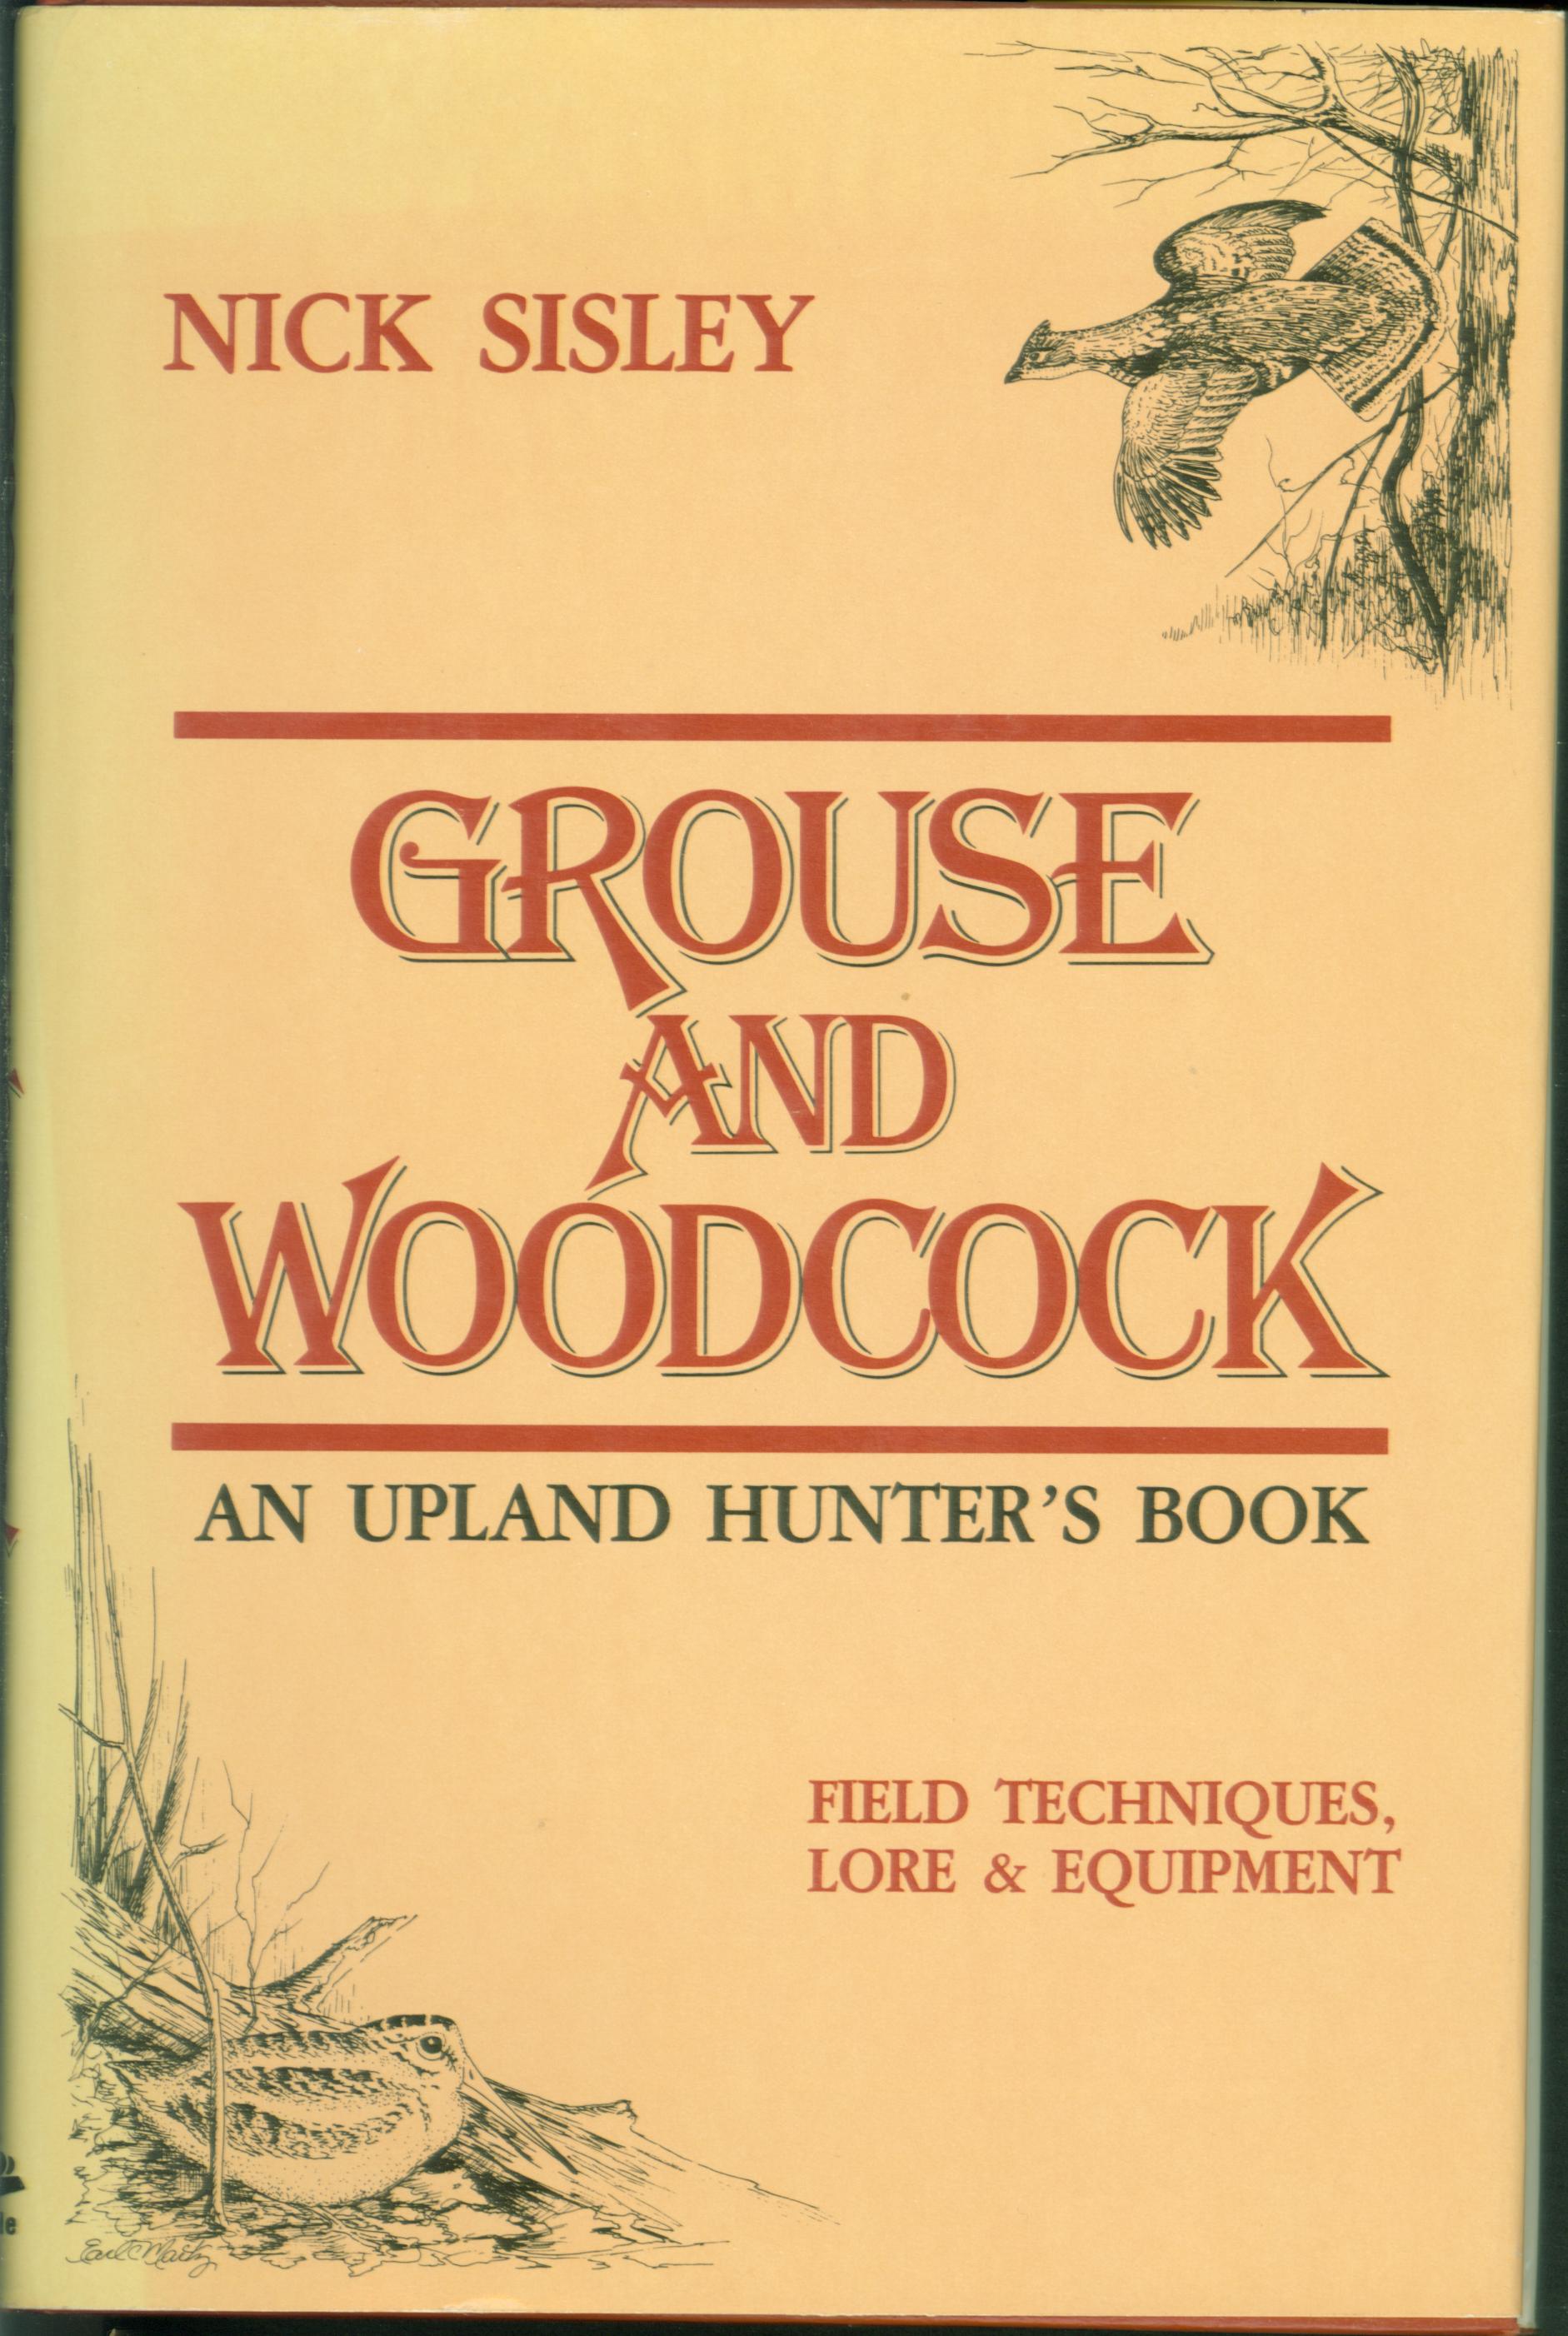 GROUSE AND WOODCOCK: an upland hunter's book, field techniques, lore, and equipment.